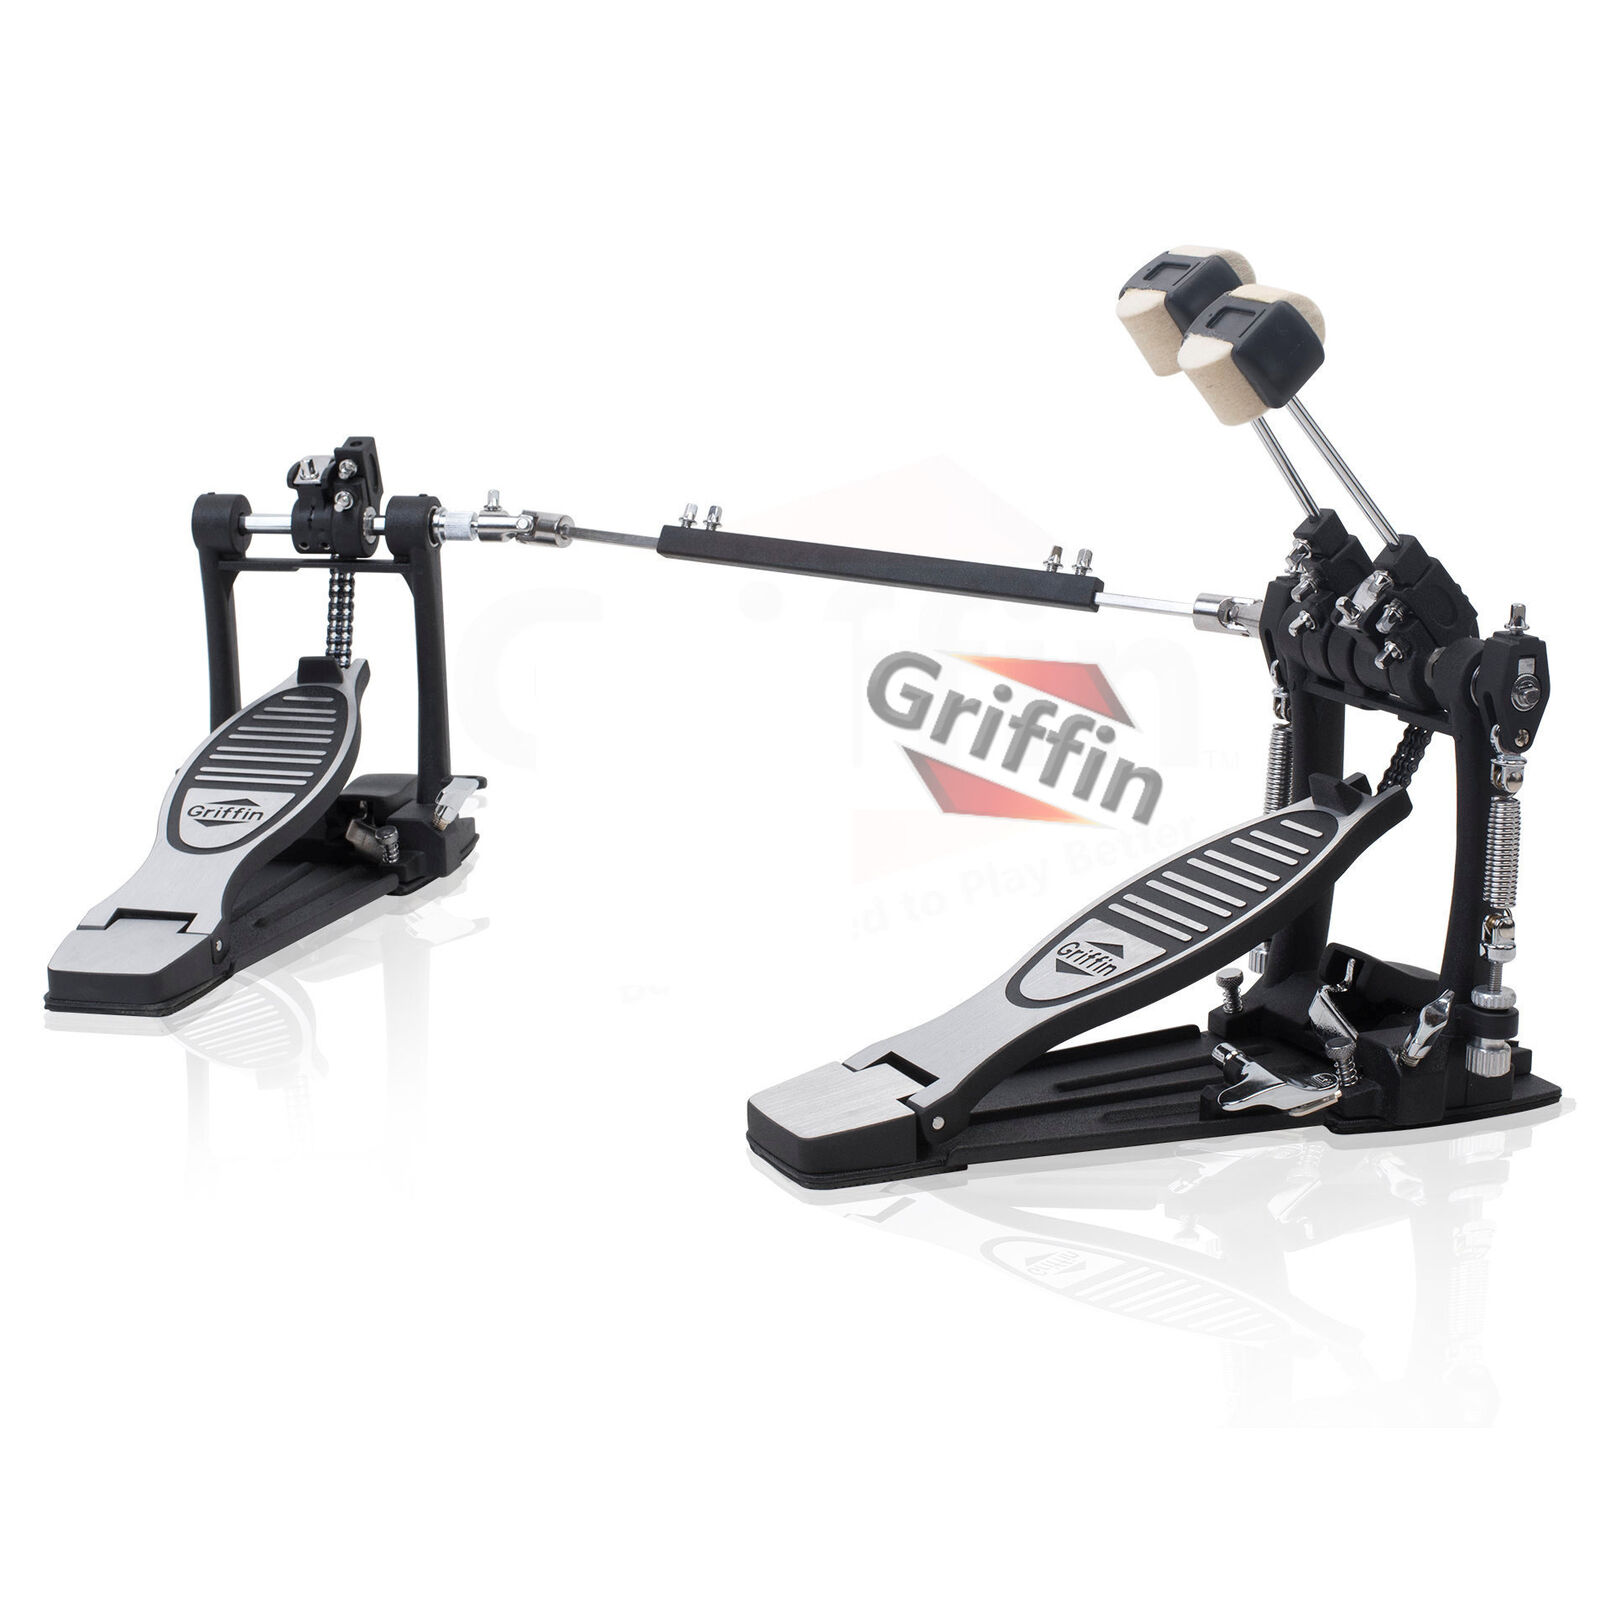 GRIFFIN Double Kick Drum Pedal - Twin Foot Bass Dual Chain Percussion Hardware